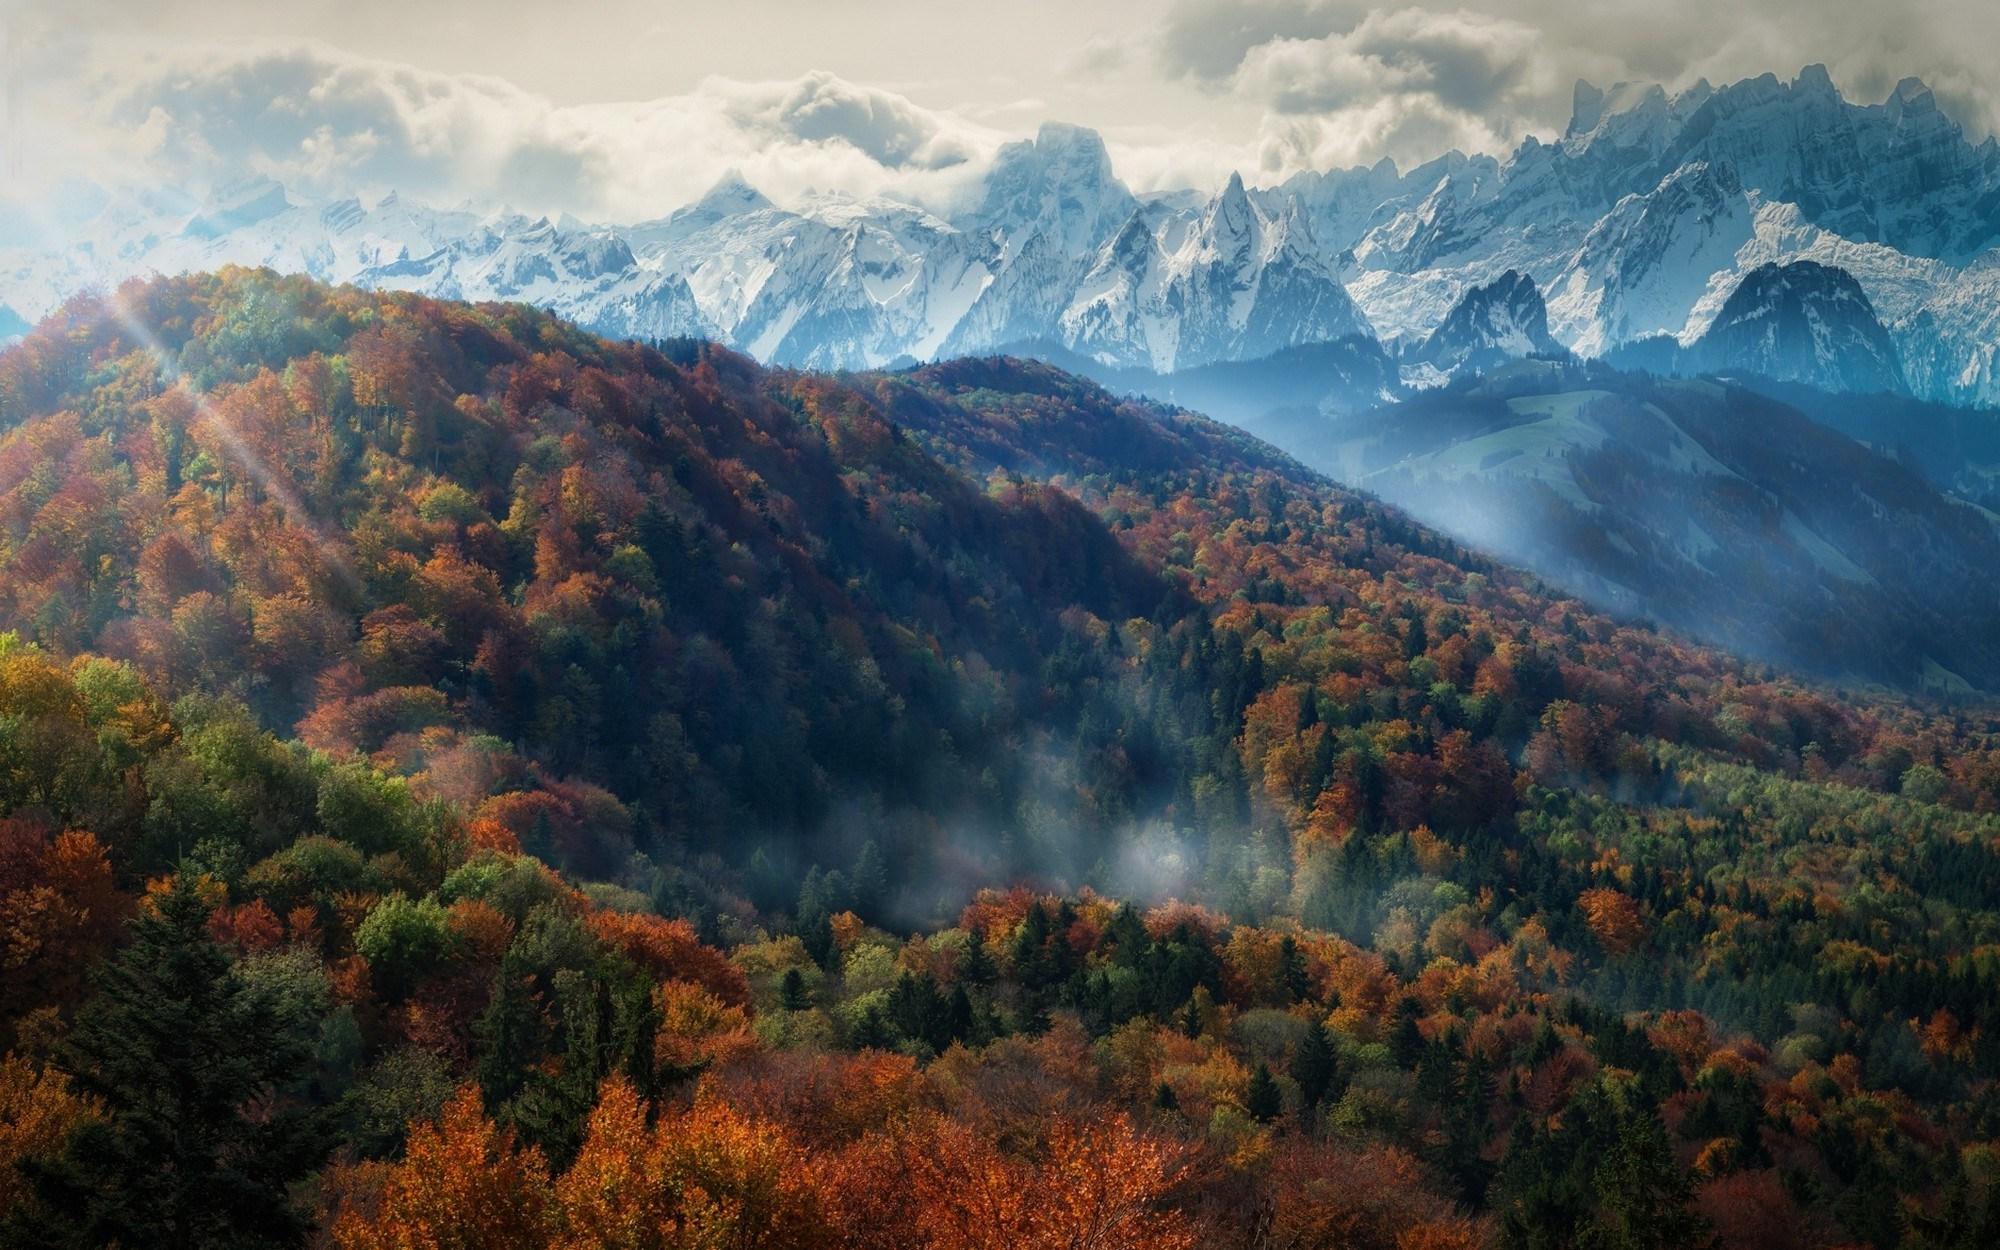 Wallpaper Image Of Mountains In Fall Nature Landscape Alps